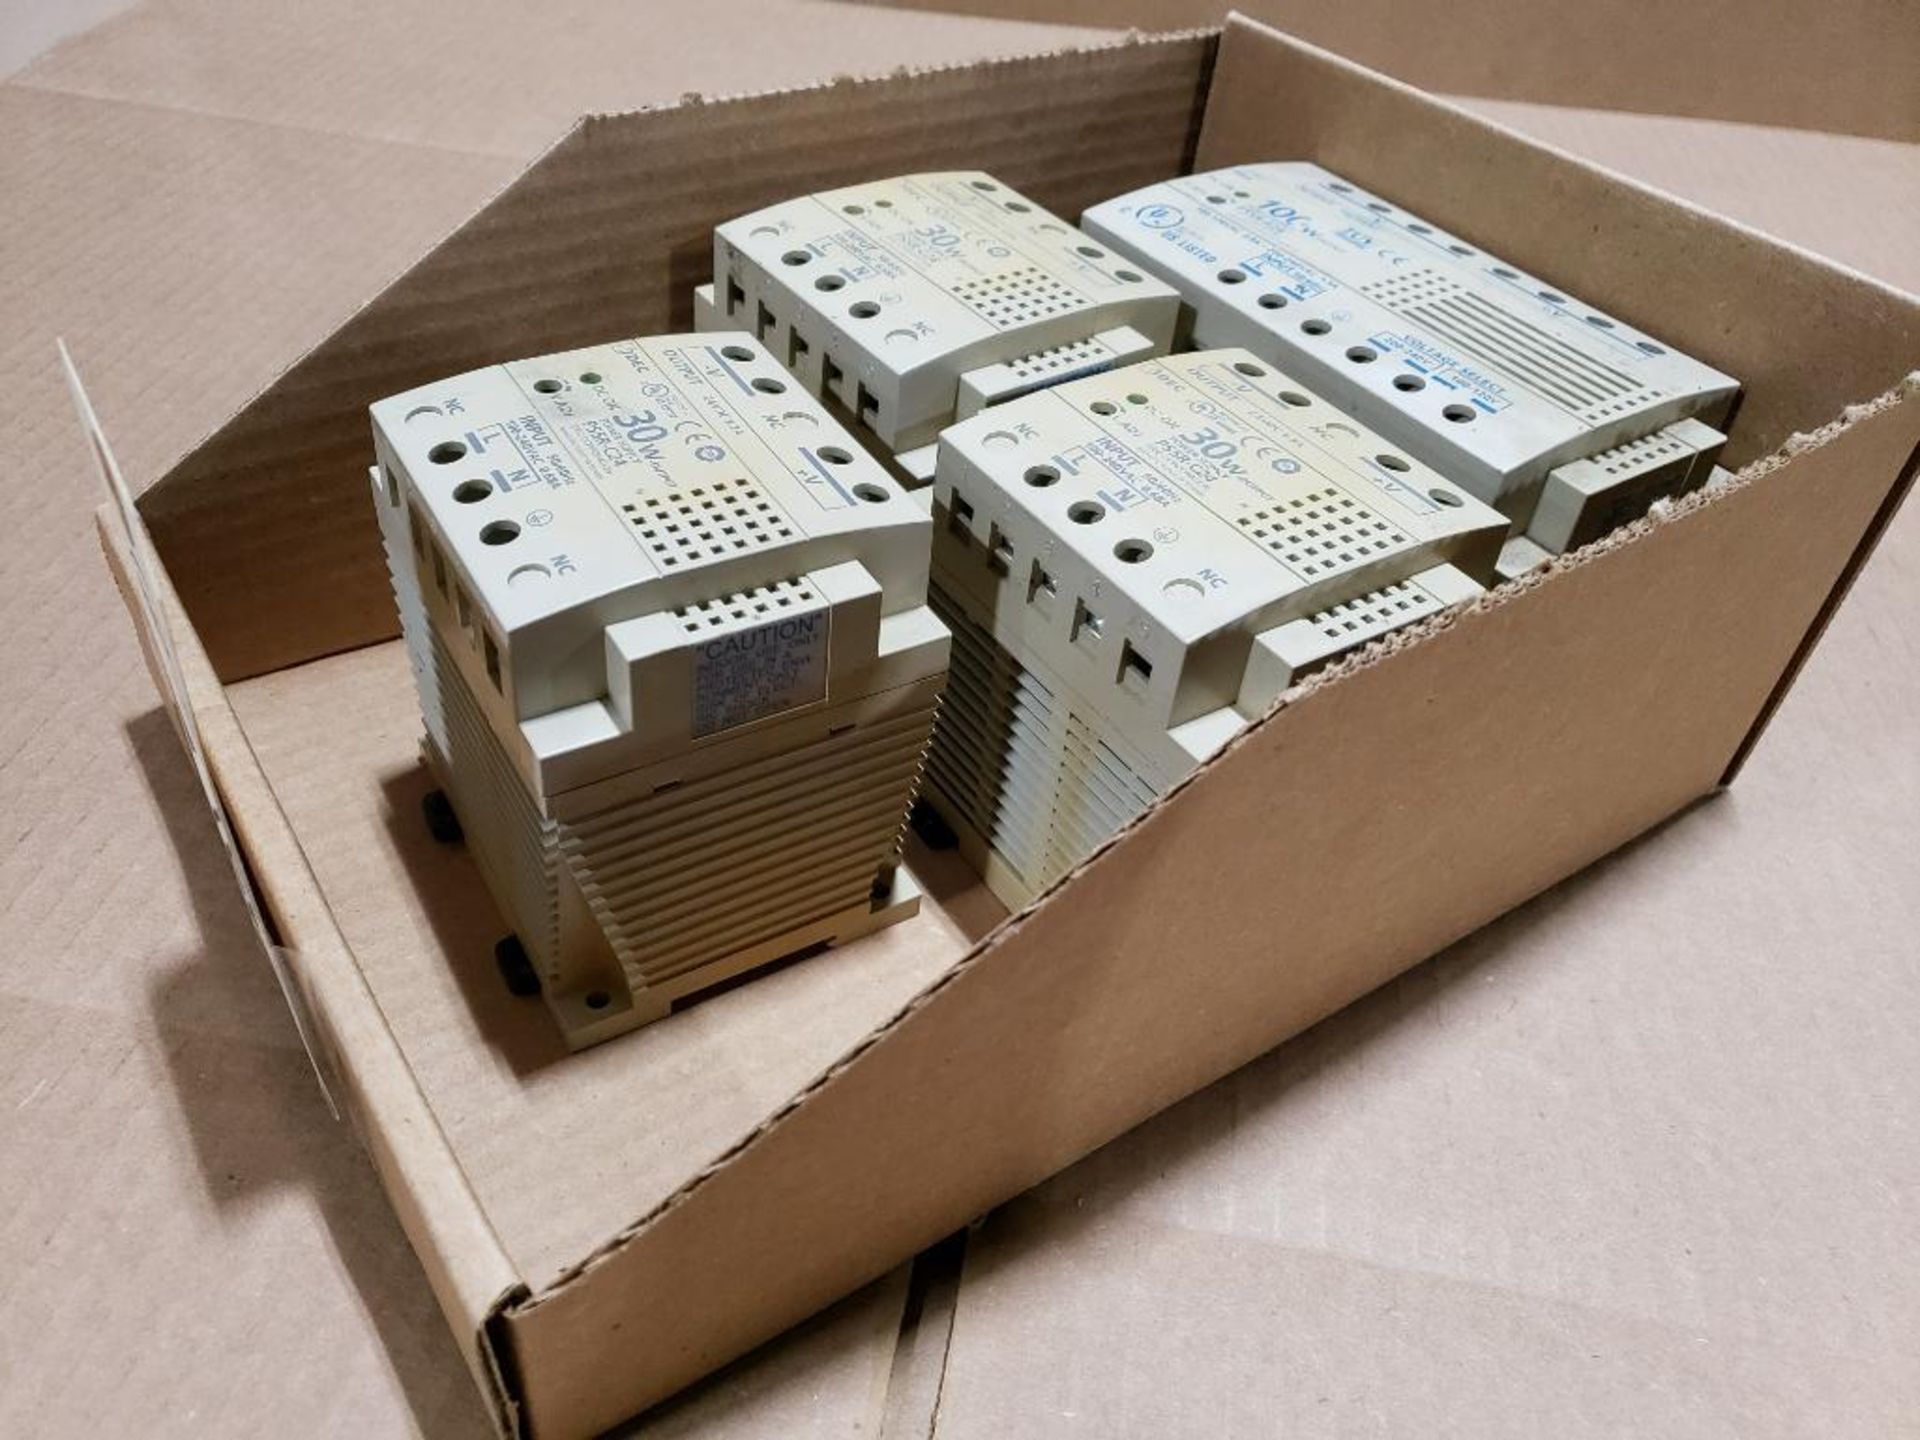 Qty 4 - Assorted Idec power supplies. - Image 5 of 5